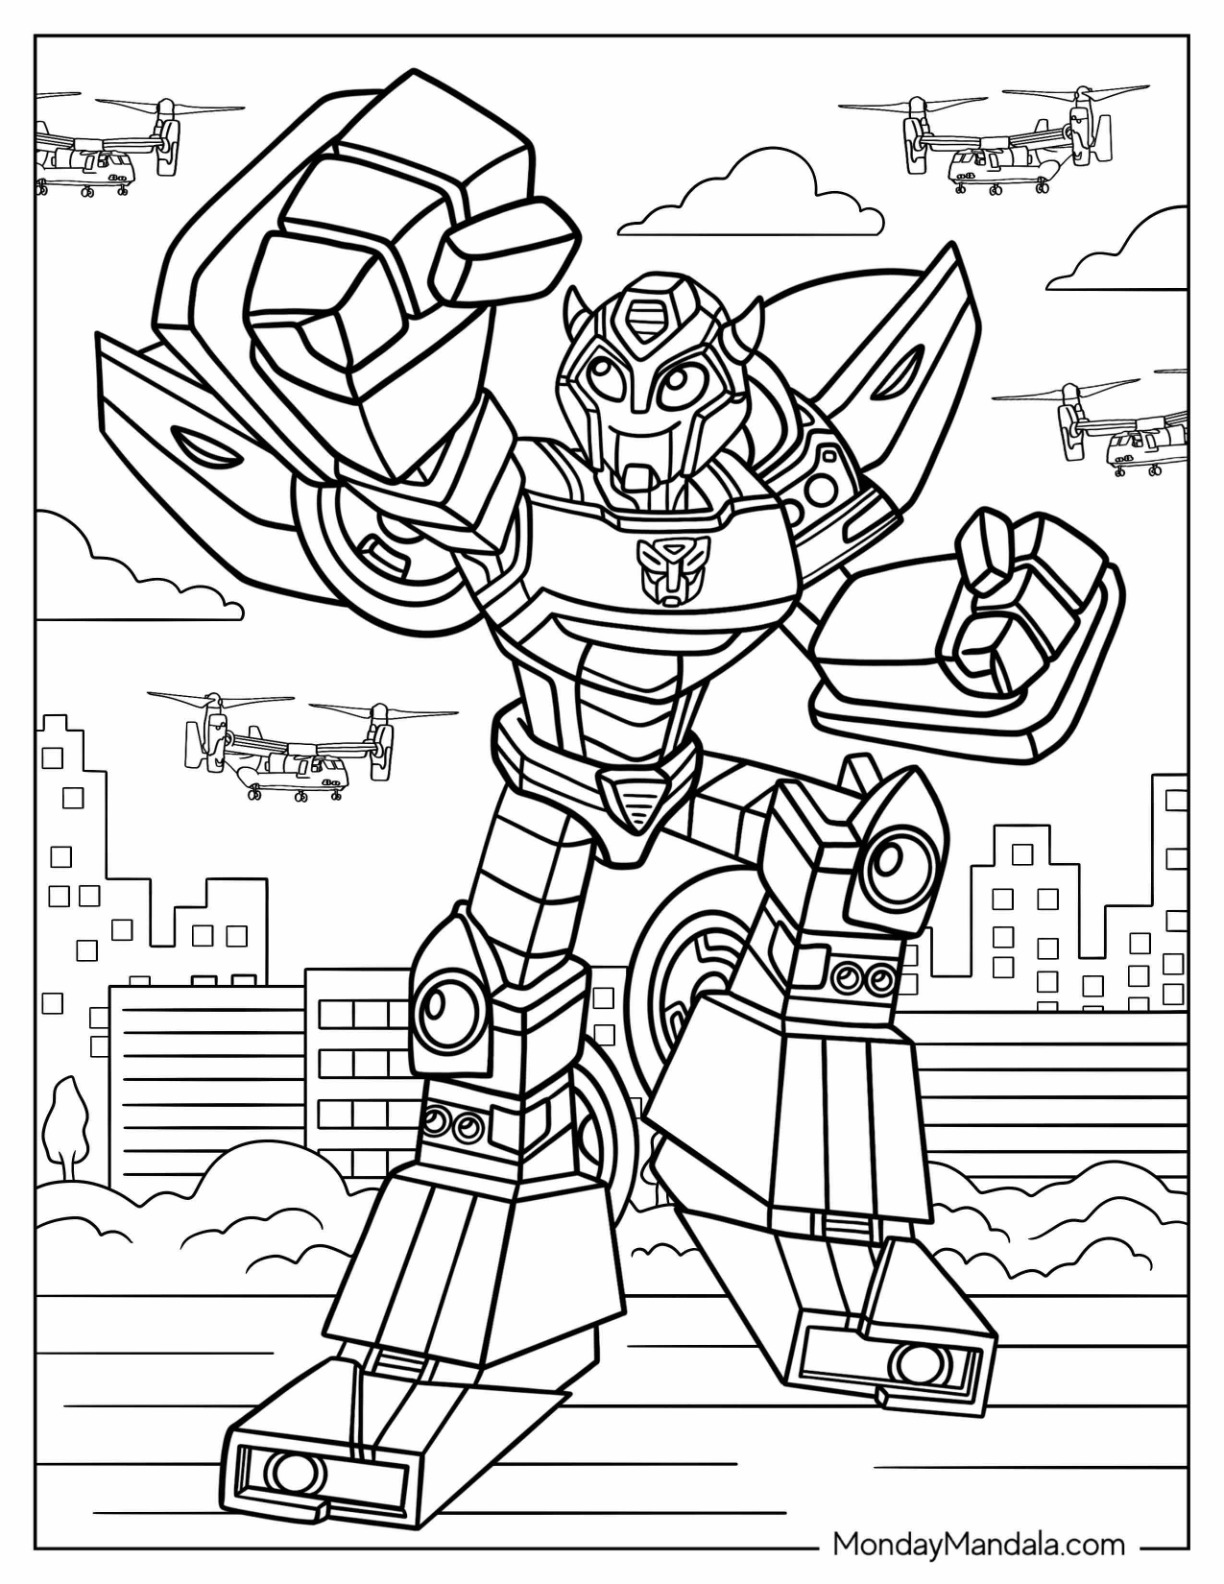 Bumblebee coloring pages free pdf printables